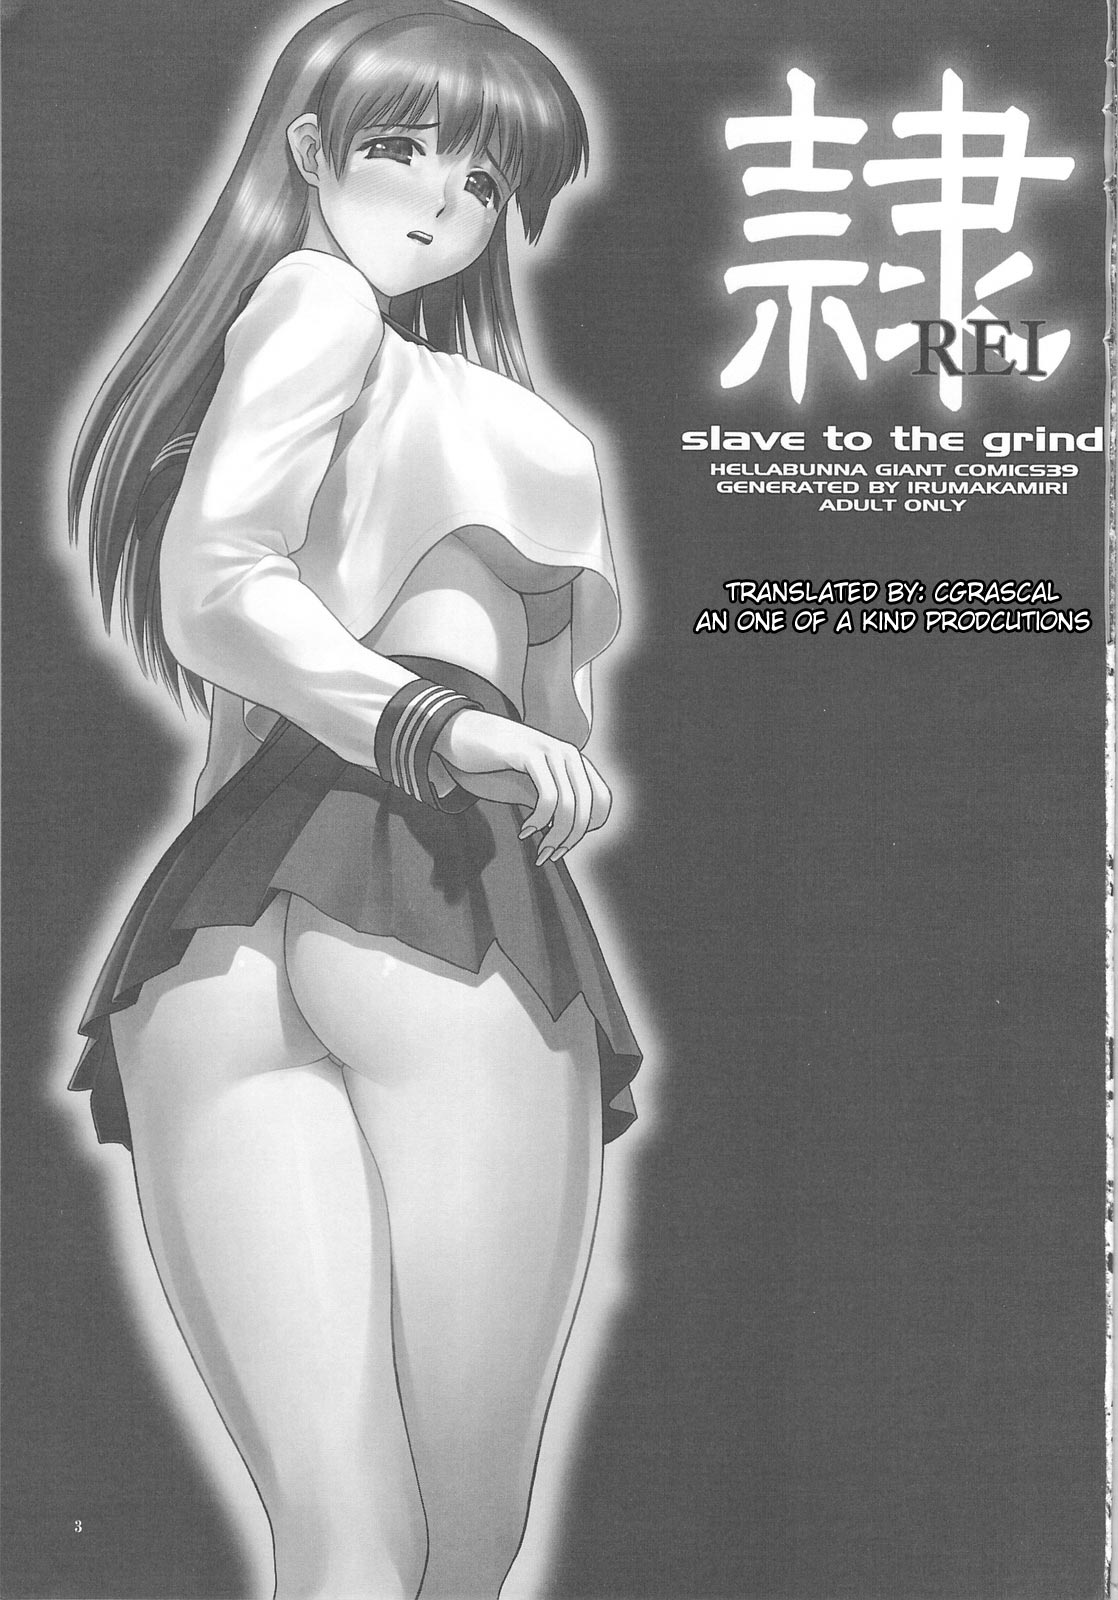 Rei Chapter 06 - Slave To The Ground [Hellabunna ] 